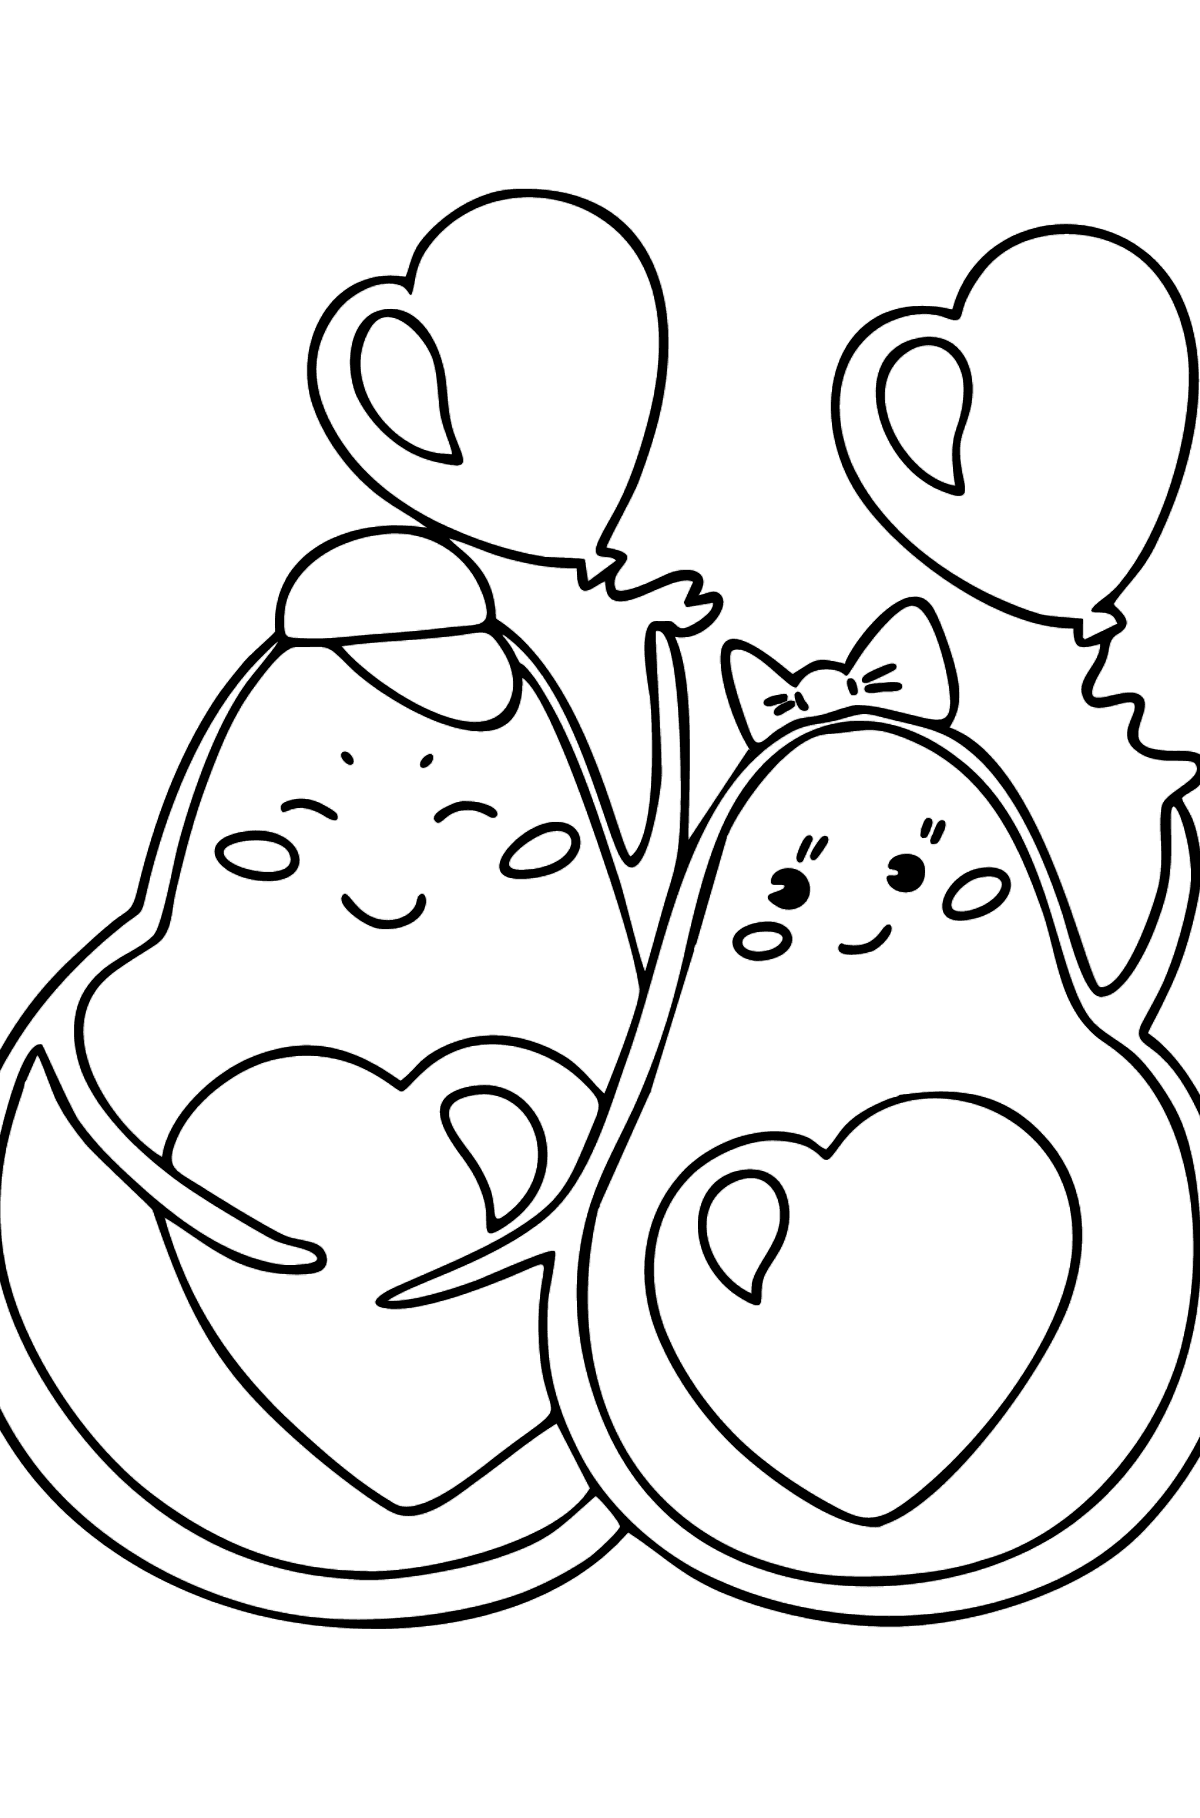 Avocado in Love coloring page - Coloring Pages for Kids